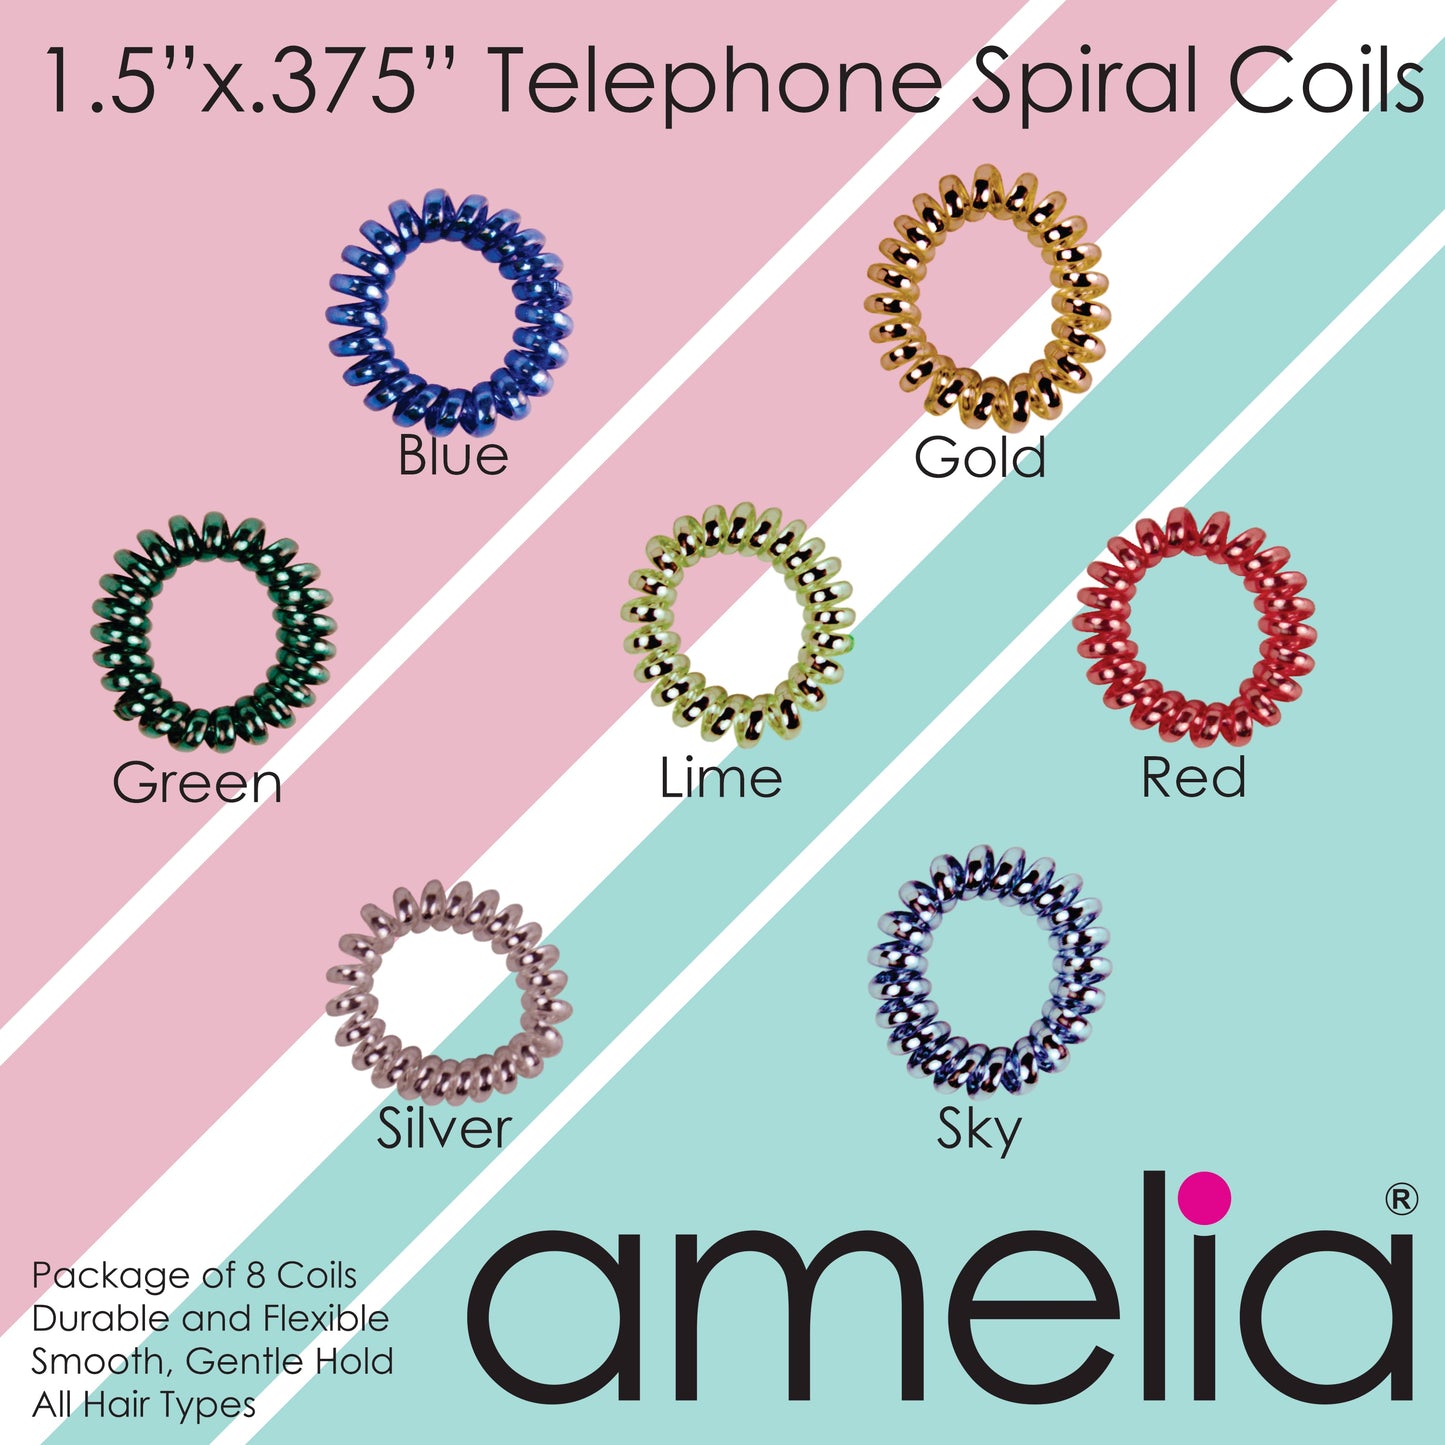 Amelia Beauty, 8 Small Shinny Elastic Hair Telephone Cord Coils, 1.5in Diameter Spiral Hair Ties, Strong Hold, Gentle on Hair, Red, Silver and Blue